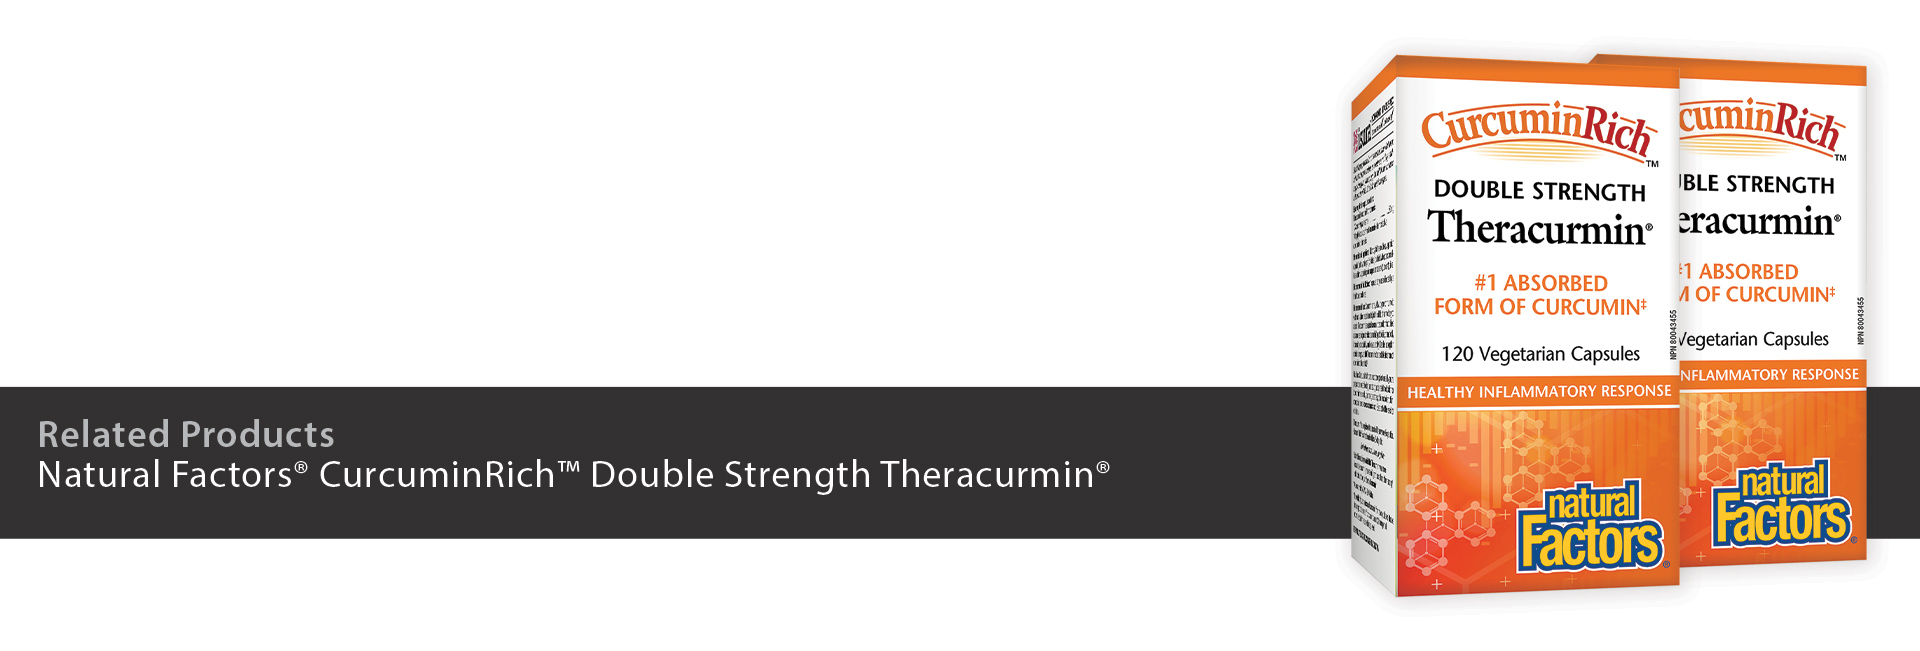 Natural Factors® CurcuminRich™ Double Strength Theracurmin®